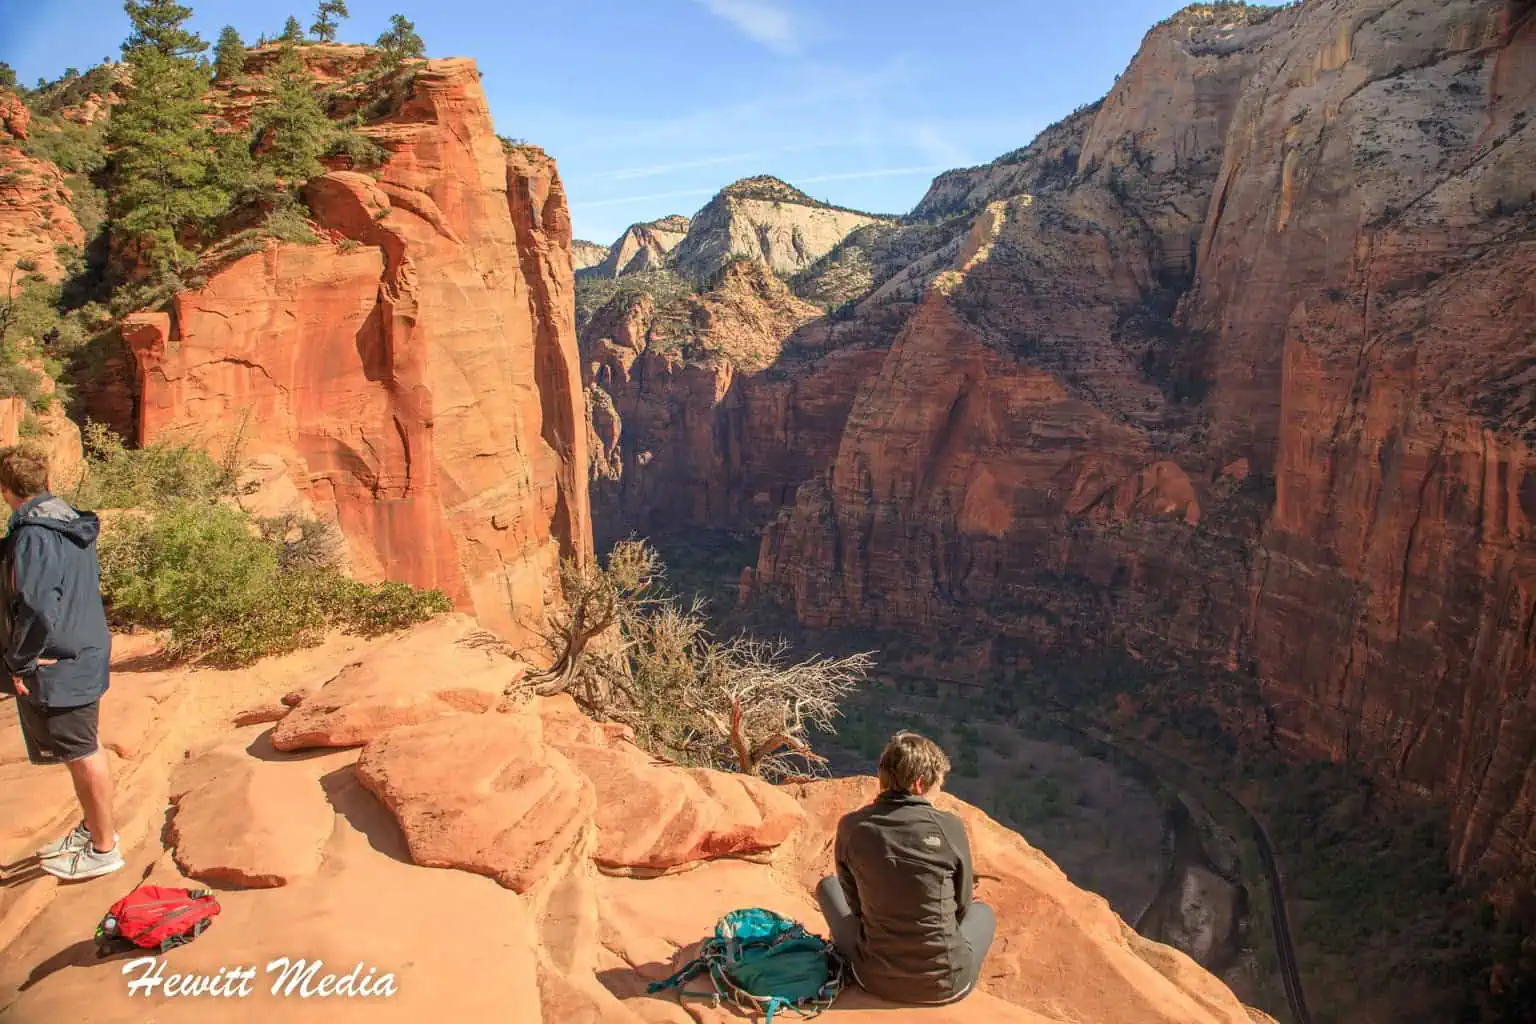 Best Hikes in the National Parks - Angels Landing in Zion